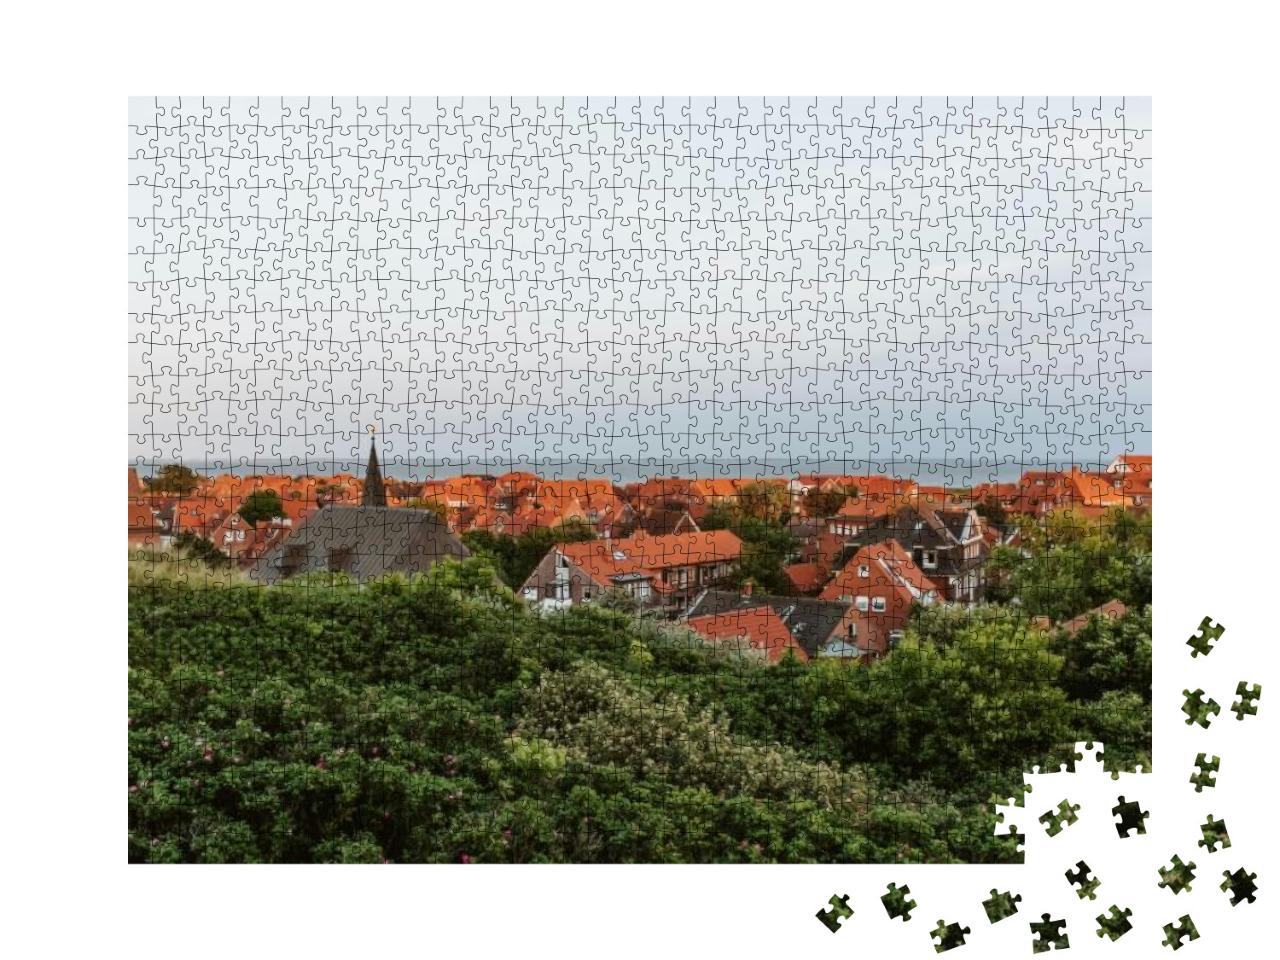 View from the Dunes Towards the Main Village on the North... Jigsaw Puzzle with 1000 pieces